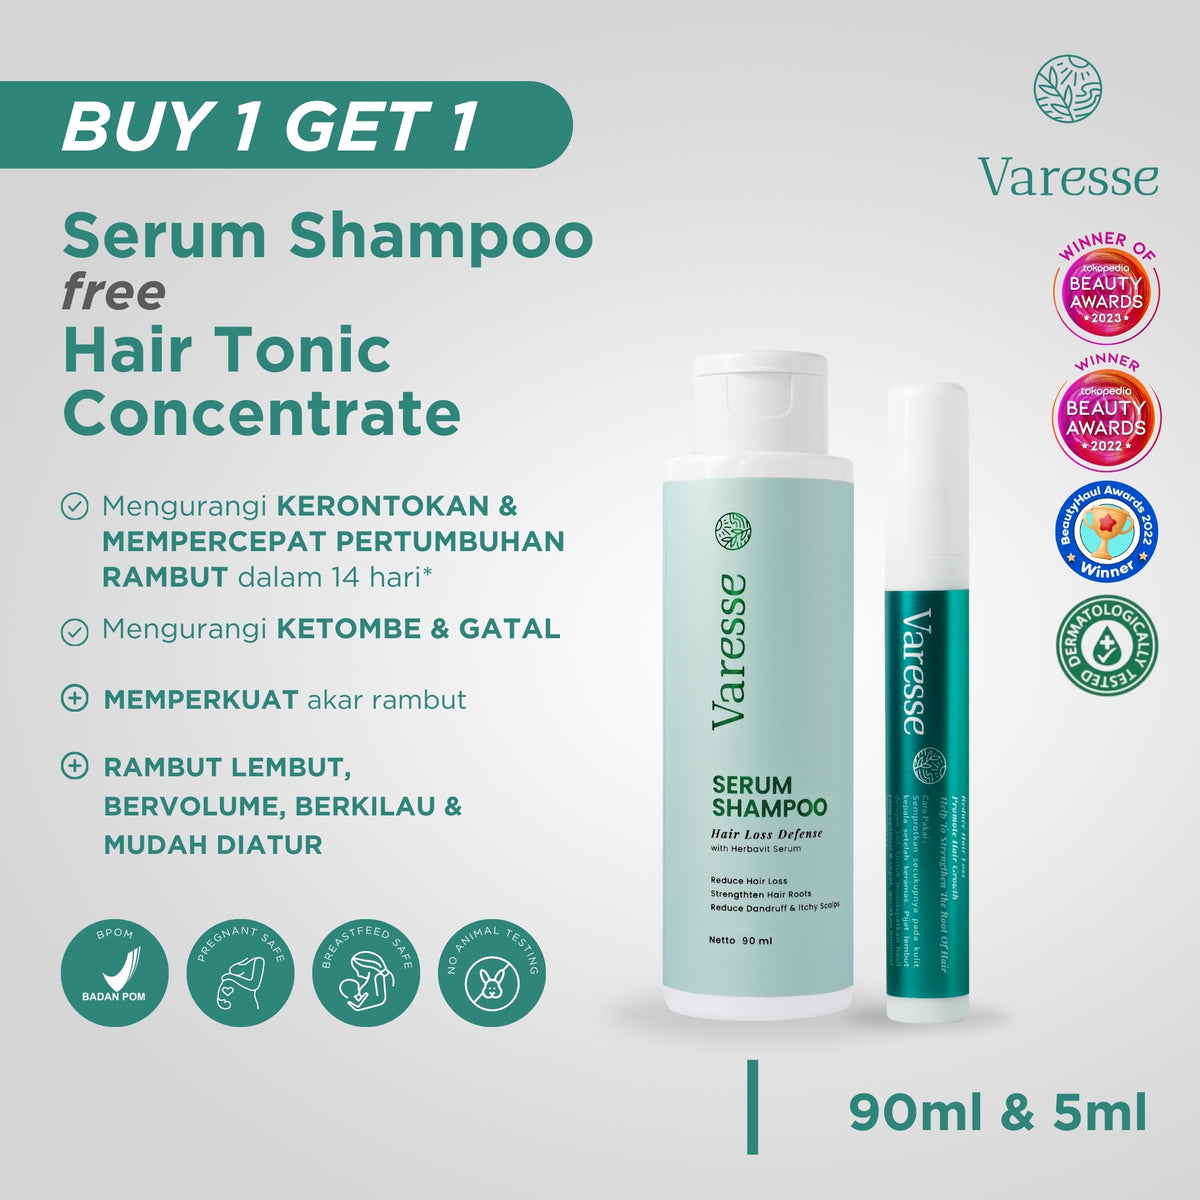 [BUY 1 GET 1] Varesse Serum Shampoo 2 in 1 Conditioner 90ml FREE Hair Tonic Concentrate 5ml